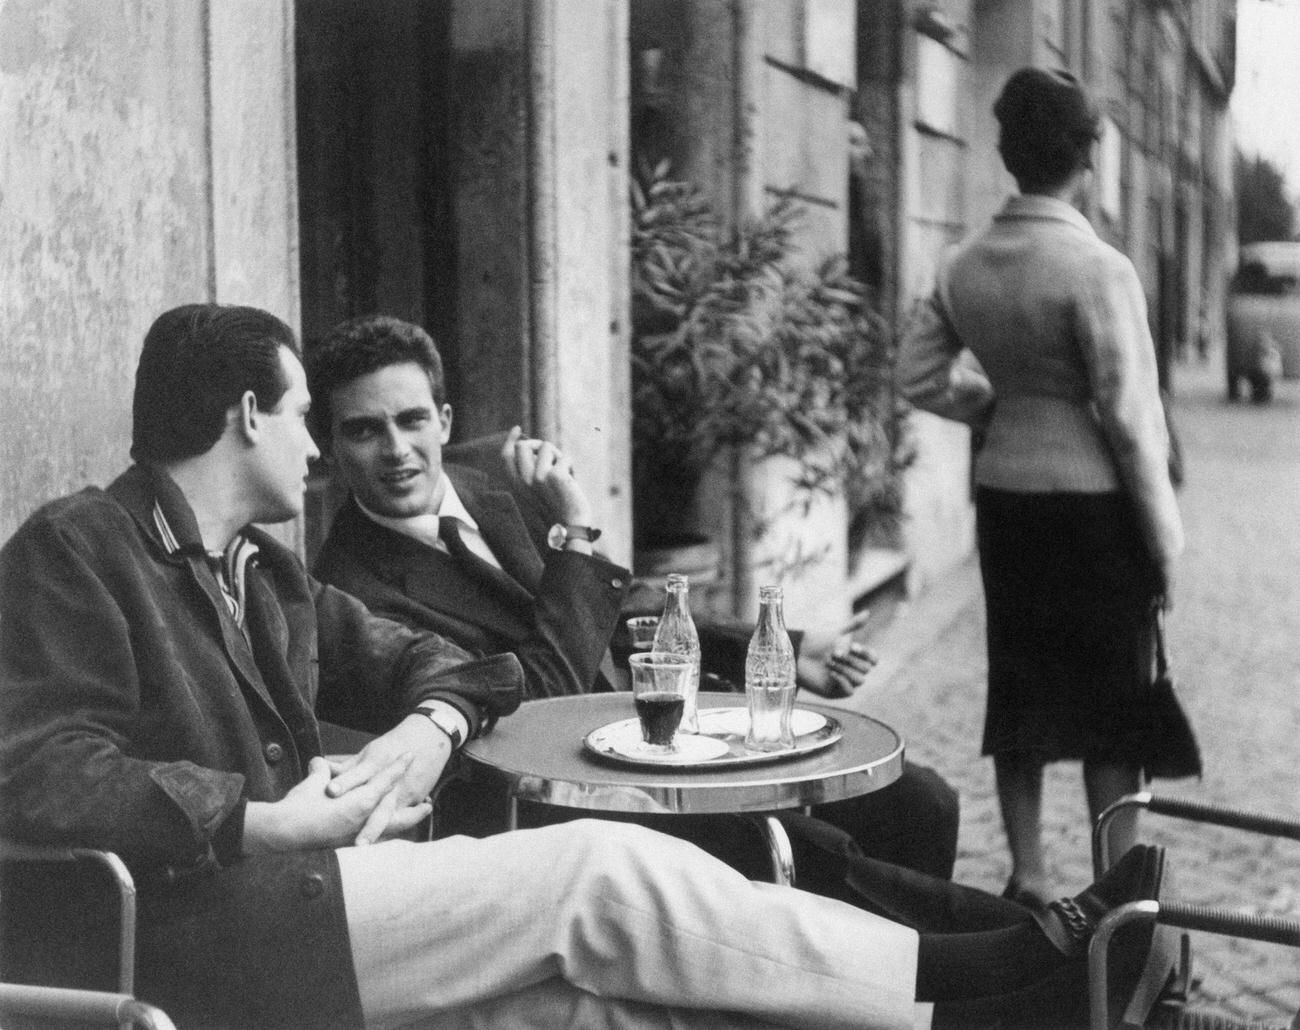 Two men chatting at a café table with Coca-Cola bottles, 1959.